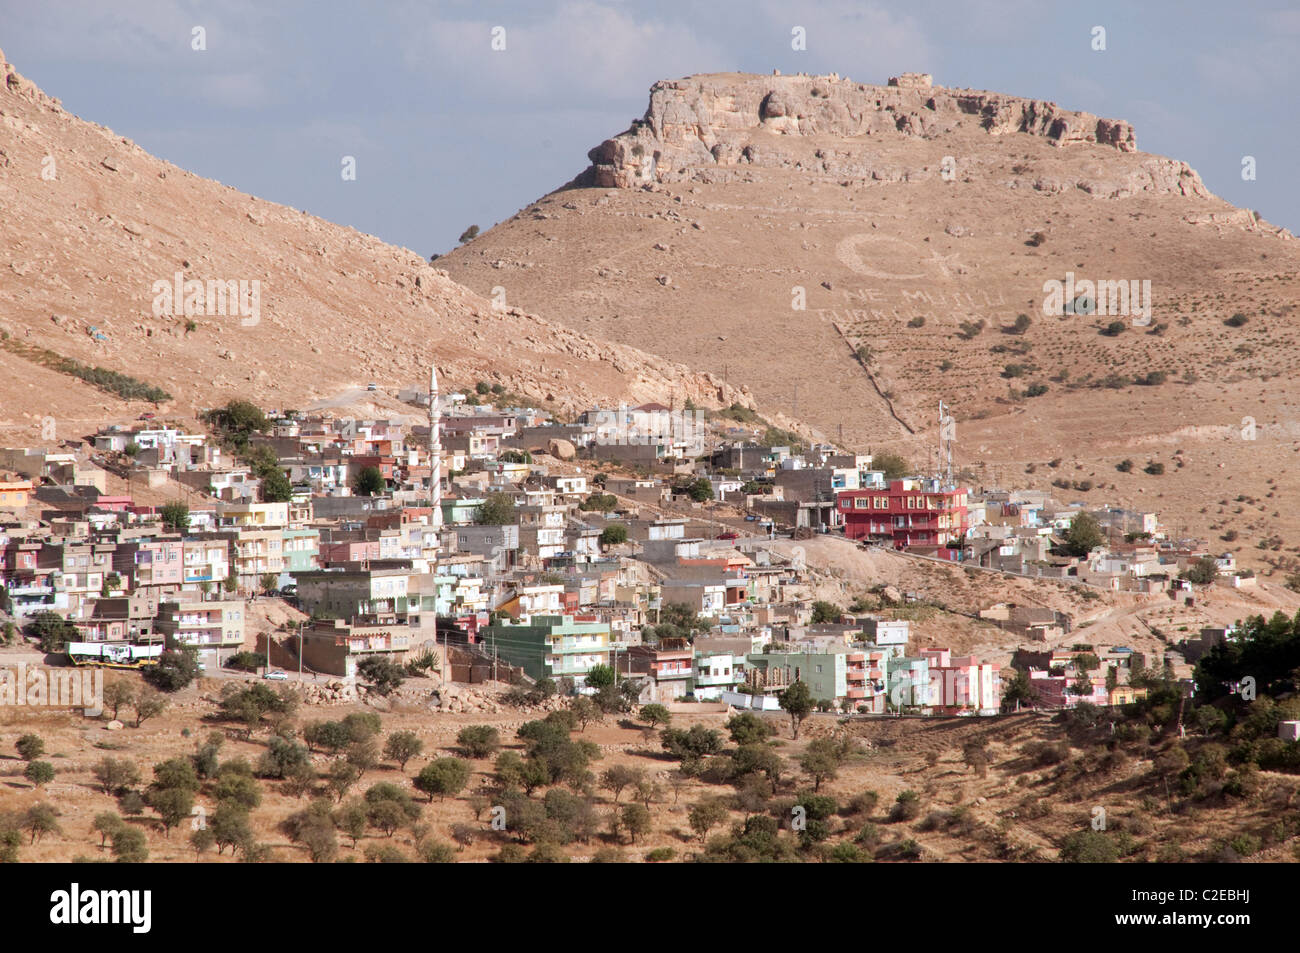 A view of the suburban outskirts of the ancient city of Mardin, in the eastern Anatolia region of southeastern Turkey. Stock Photo